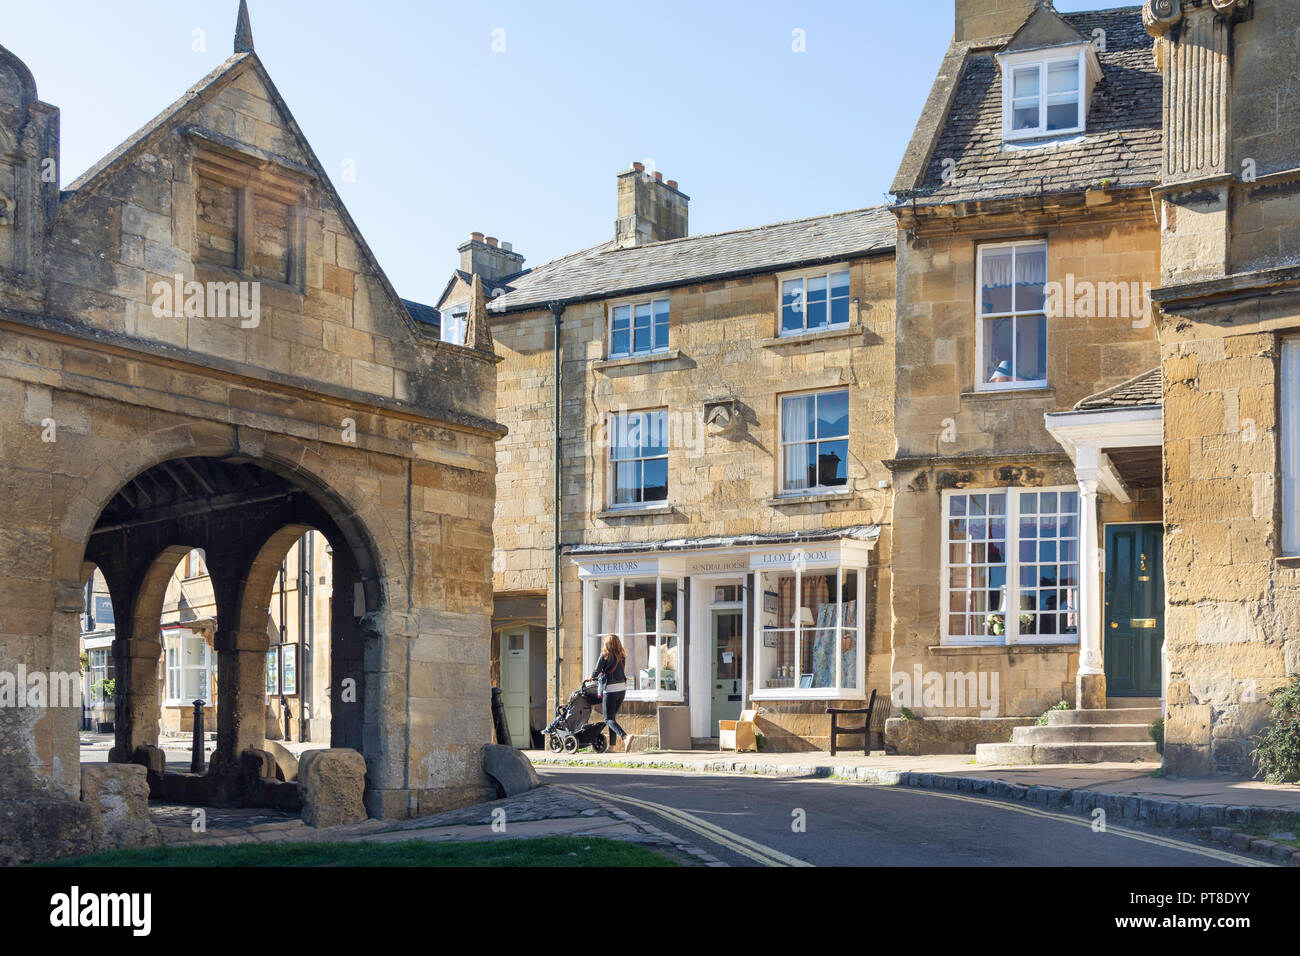 Market Hall, High Street, Chipping Campden, Gloucestershire, Angleterre, Royaume-Uni Banque D'Images